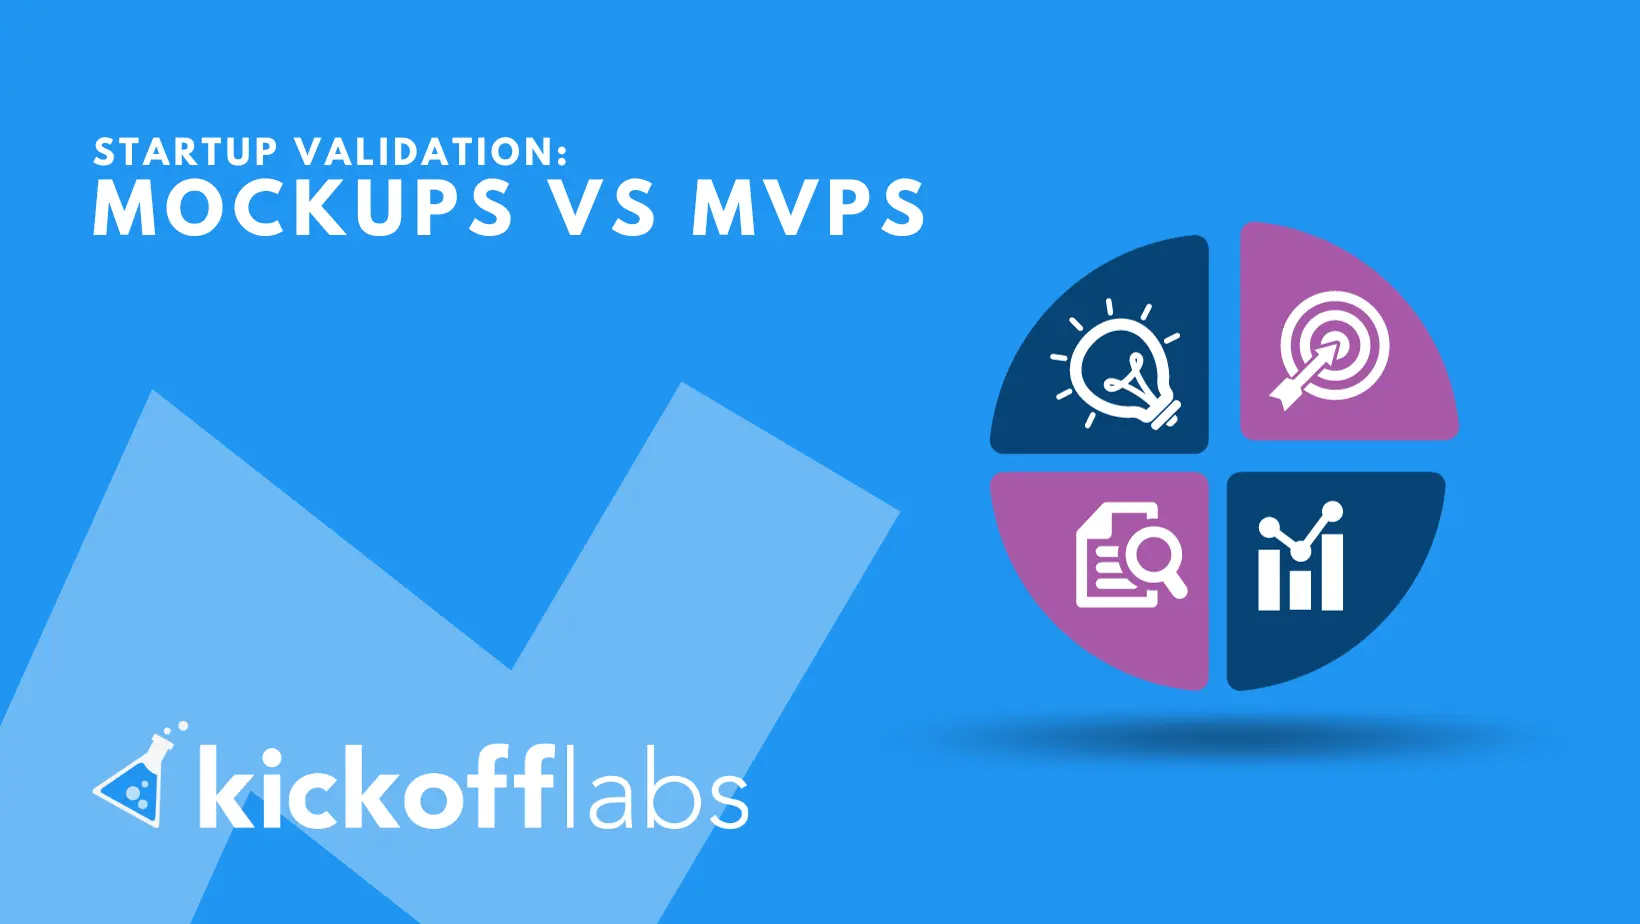 The Power of Mock-ups and MVPs in Startup Validation